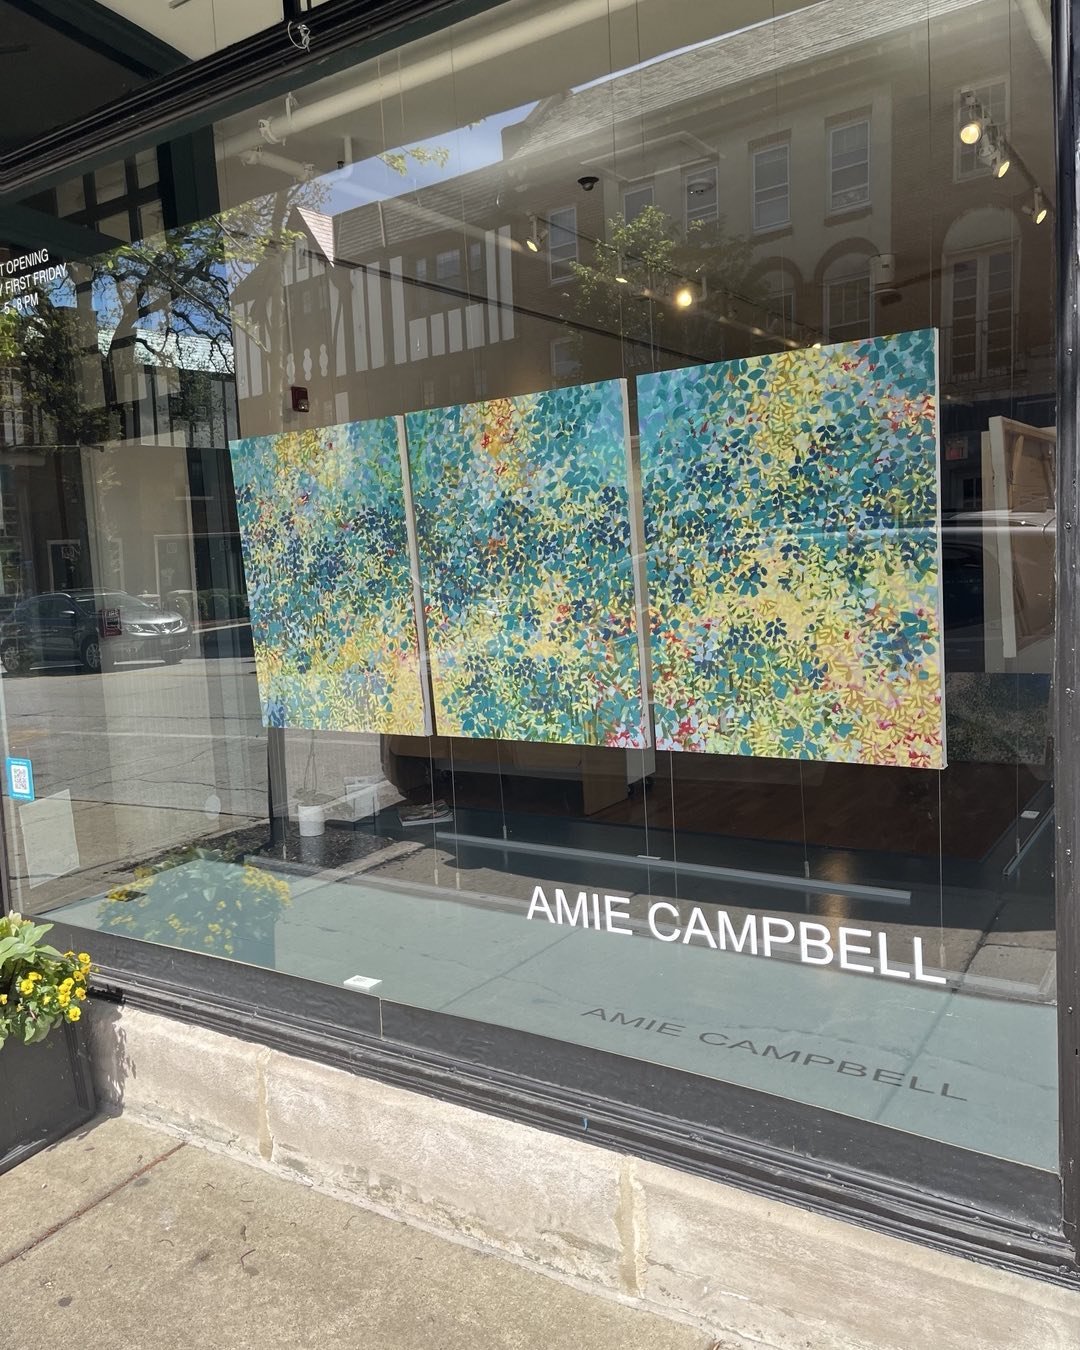 It&rsquo;s First Friday - which means an opening for this wonderful exhibit of work by Amie Campbell. Amie&rsquo;s work dazzles with bright, brilliant colors. Stop by tonight from 5-7, or anytime this month!

#FirstFriday #colorfulart #blueart #flora